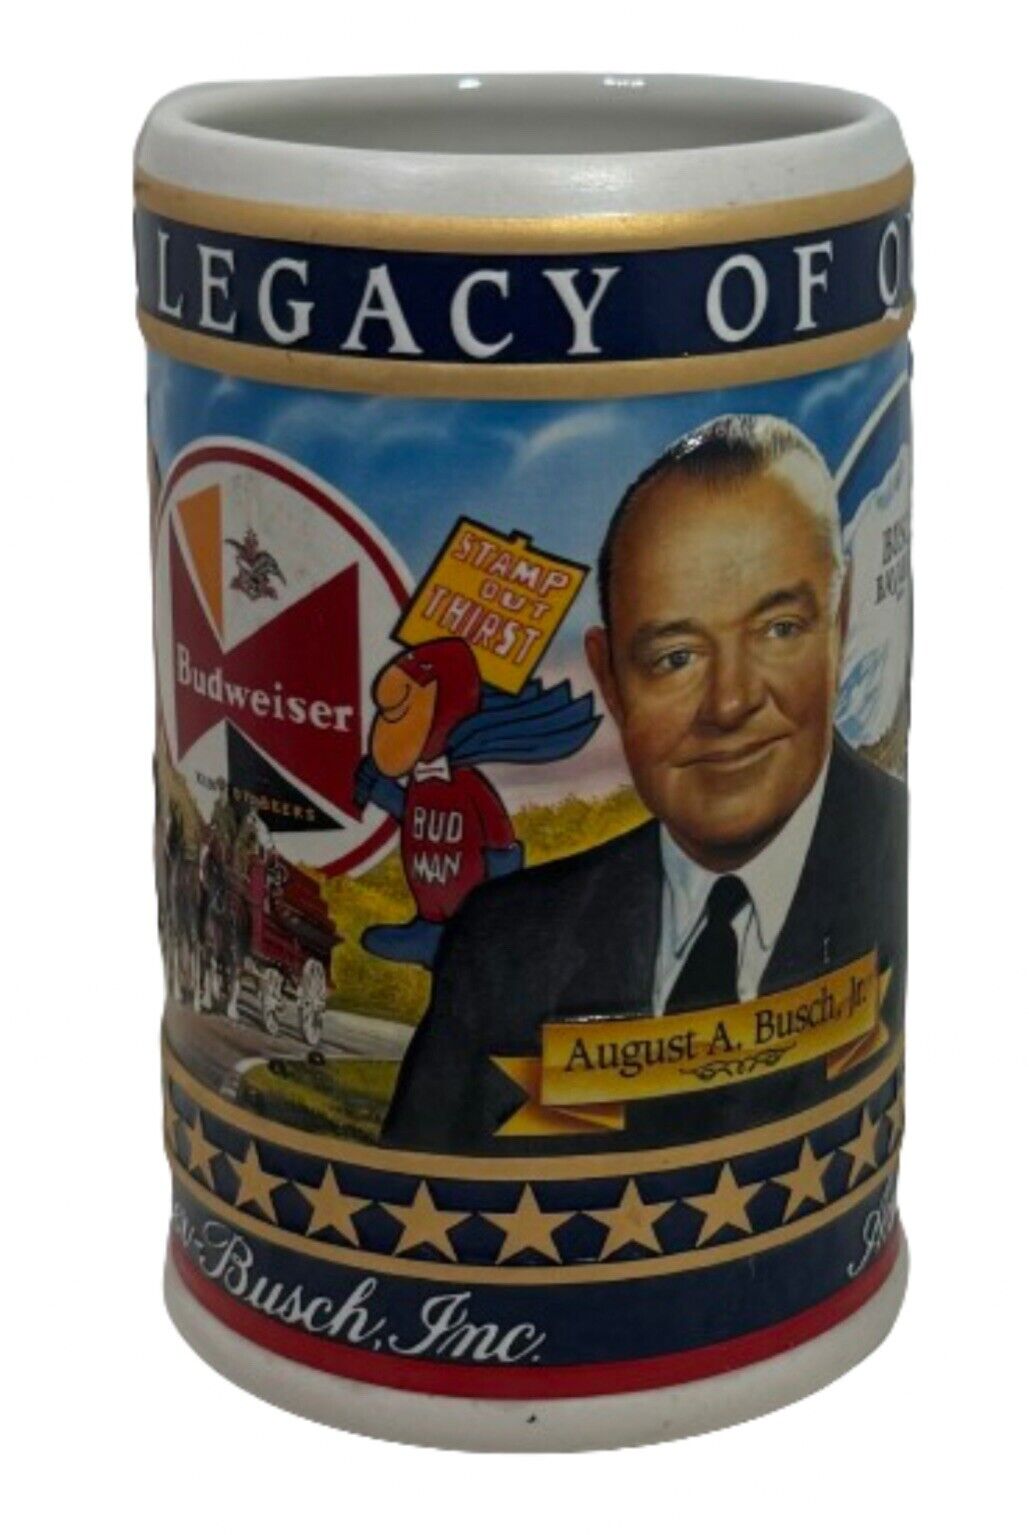 2003 Busch Family Series Stein of August A. Busch Jr. Legacy of Quality, #25037